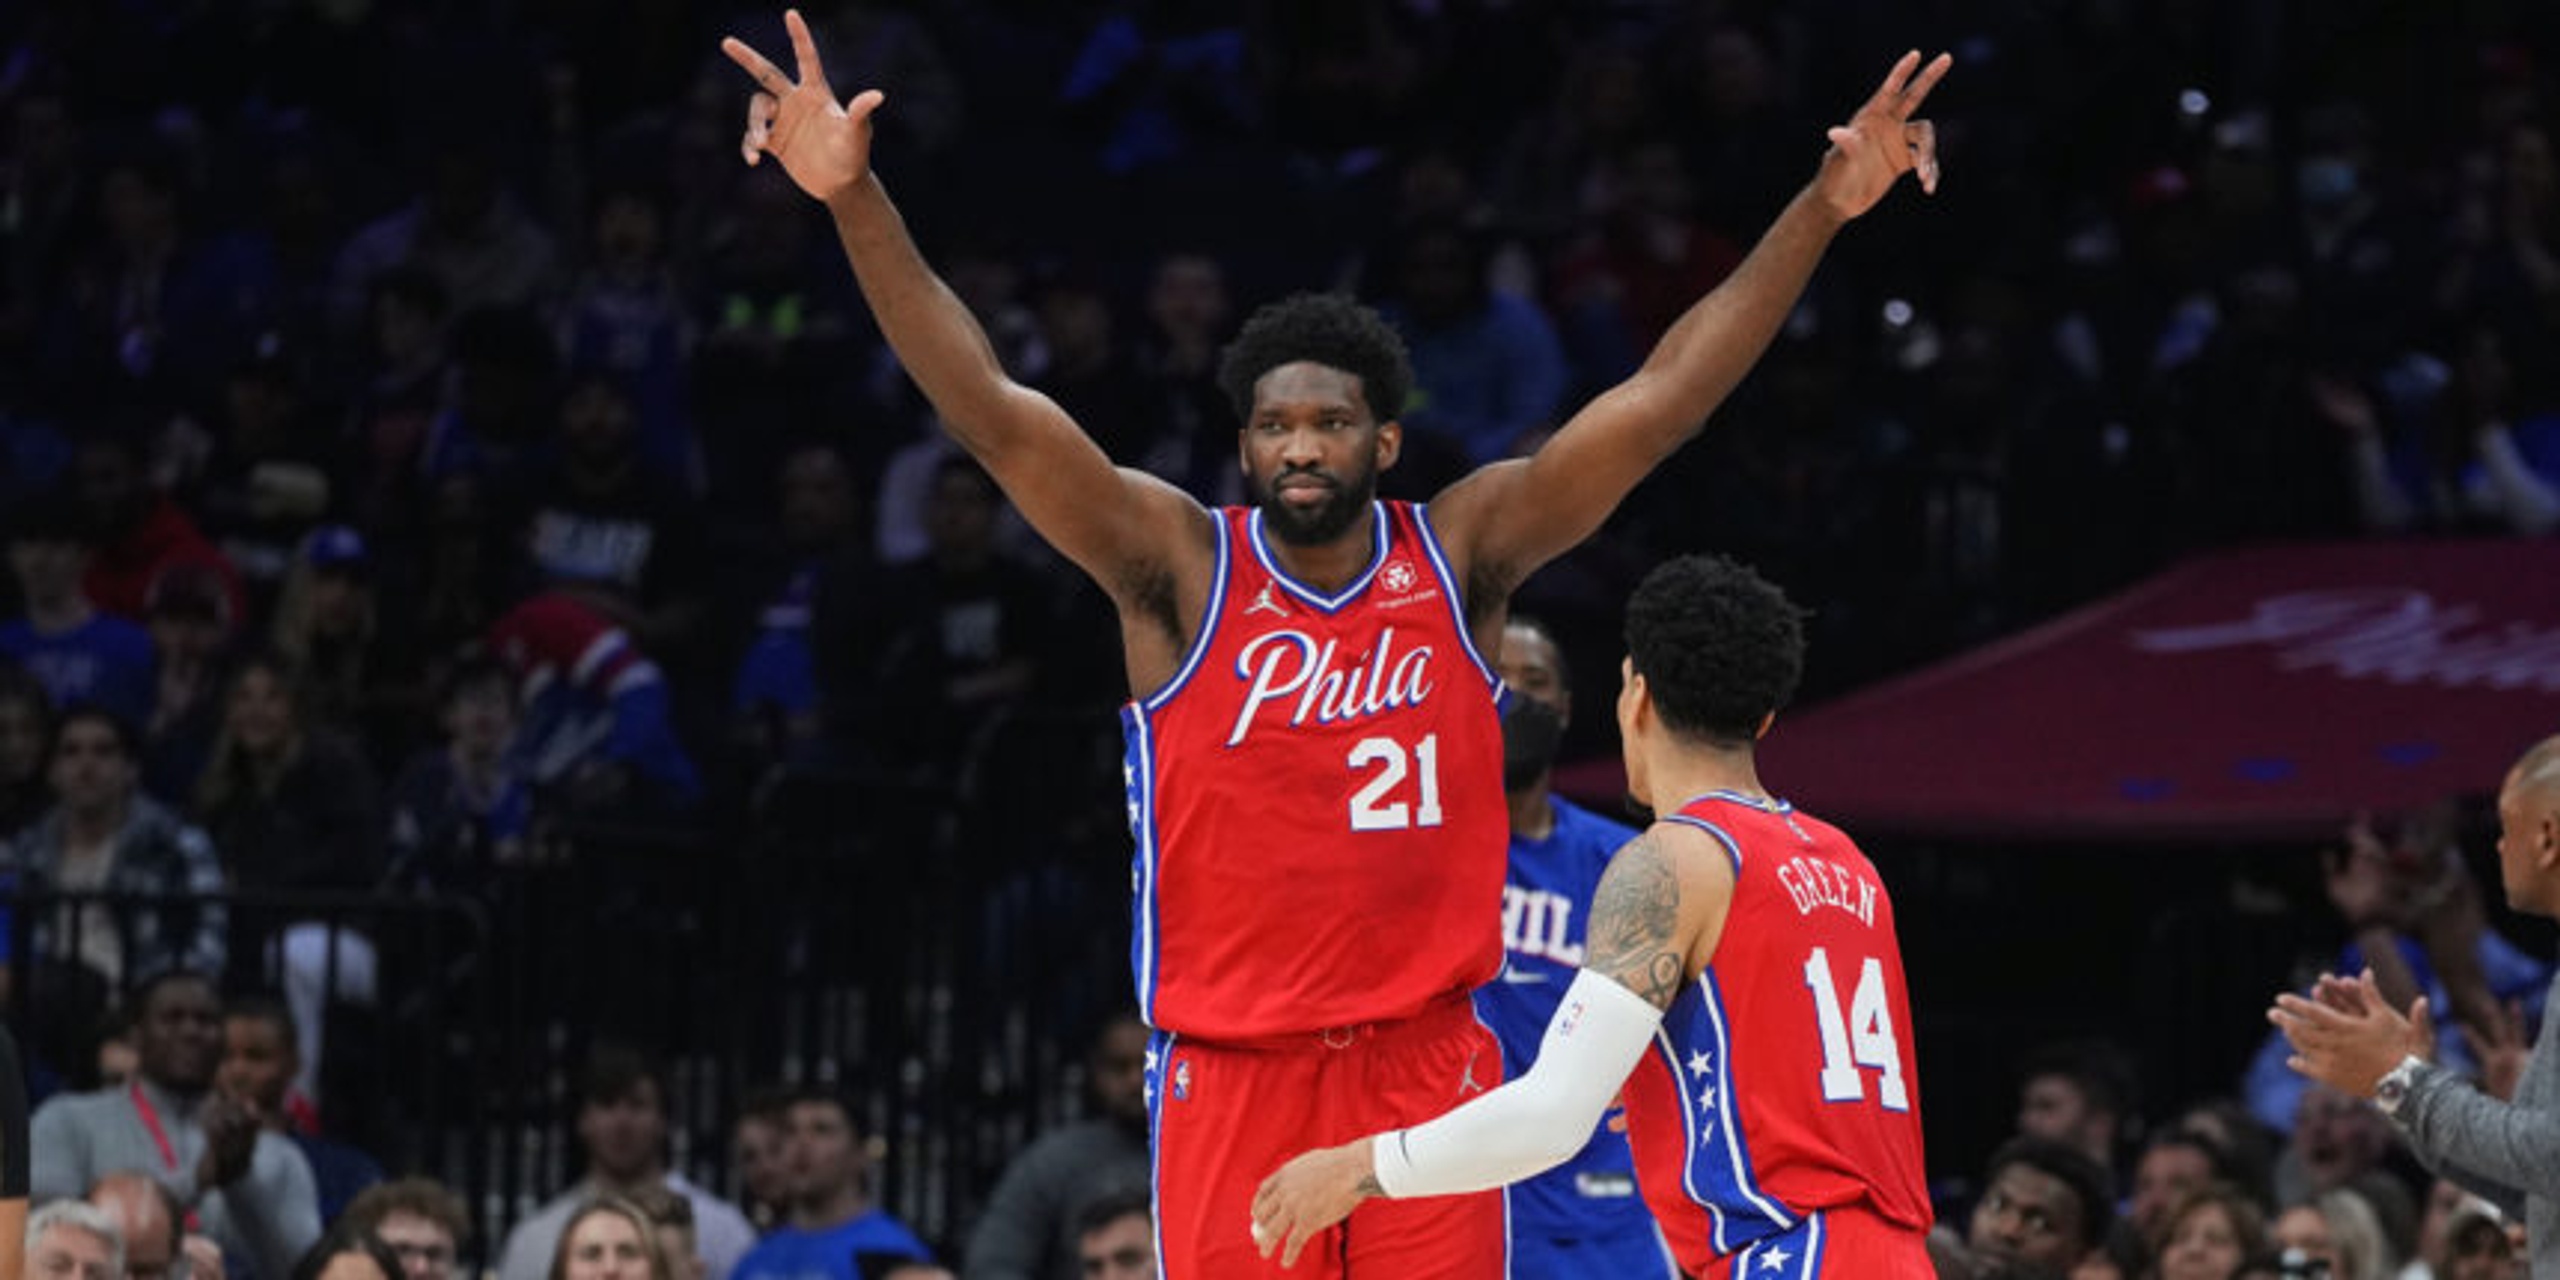 Embiid has 41 points, 20 rebounds as Sixers down Pacers